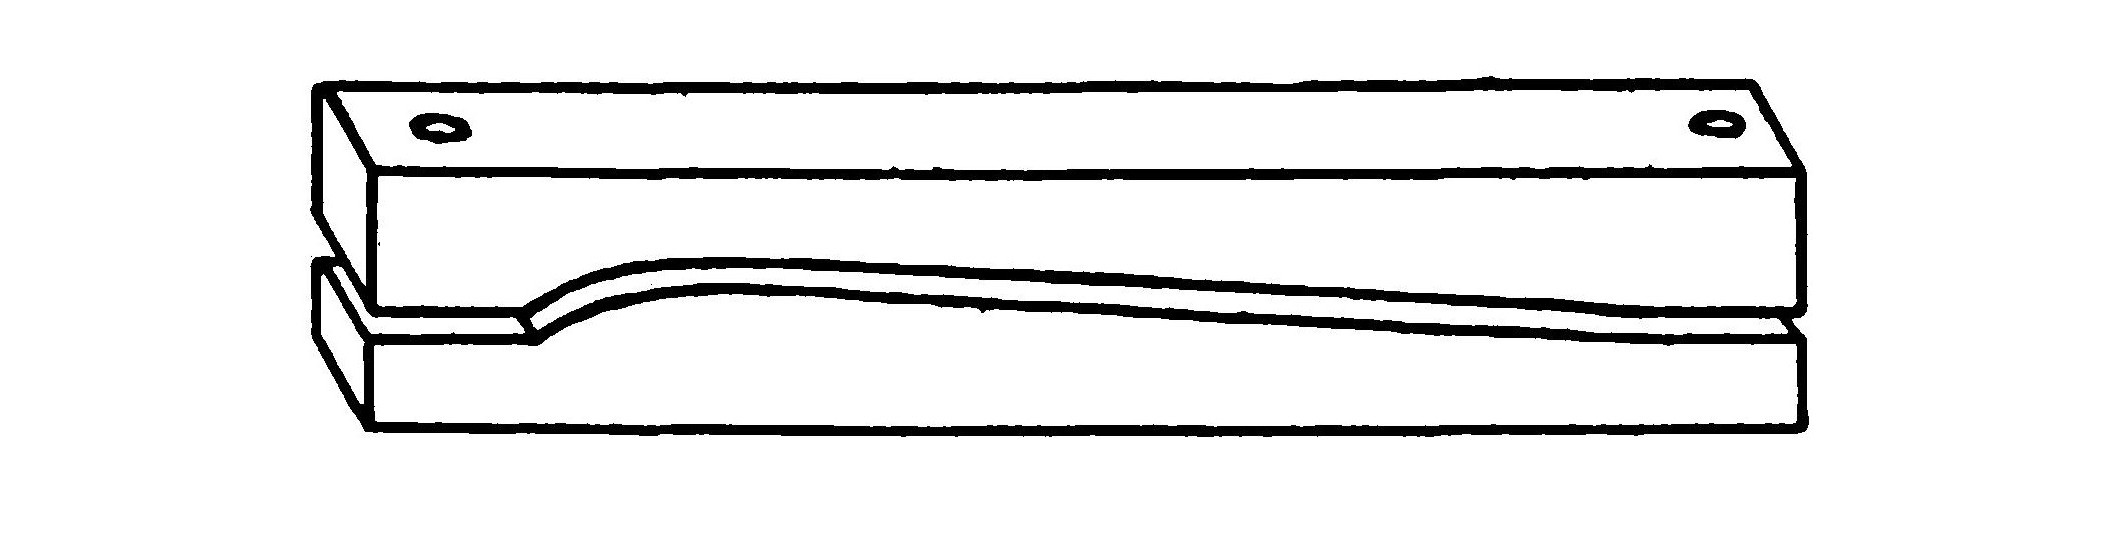 FIG. 15. Form for bending the planes.